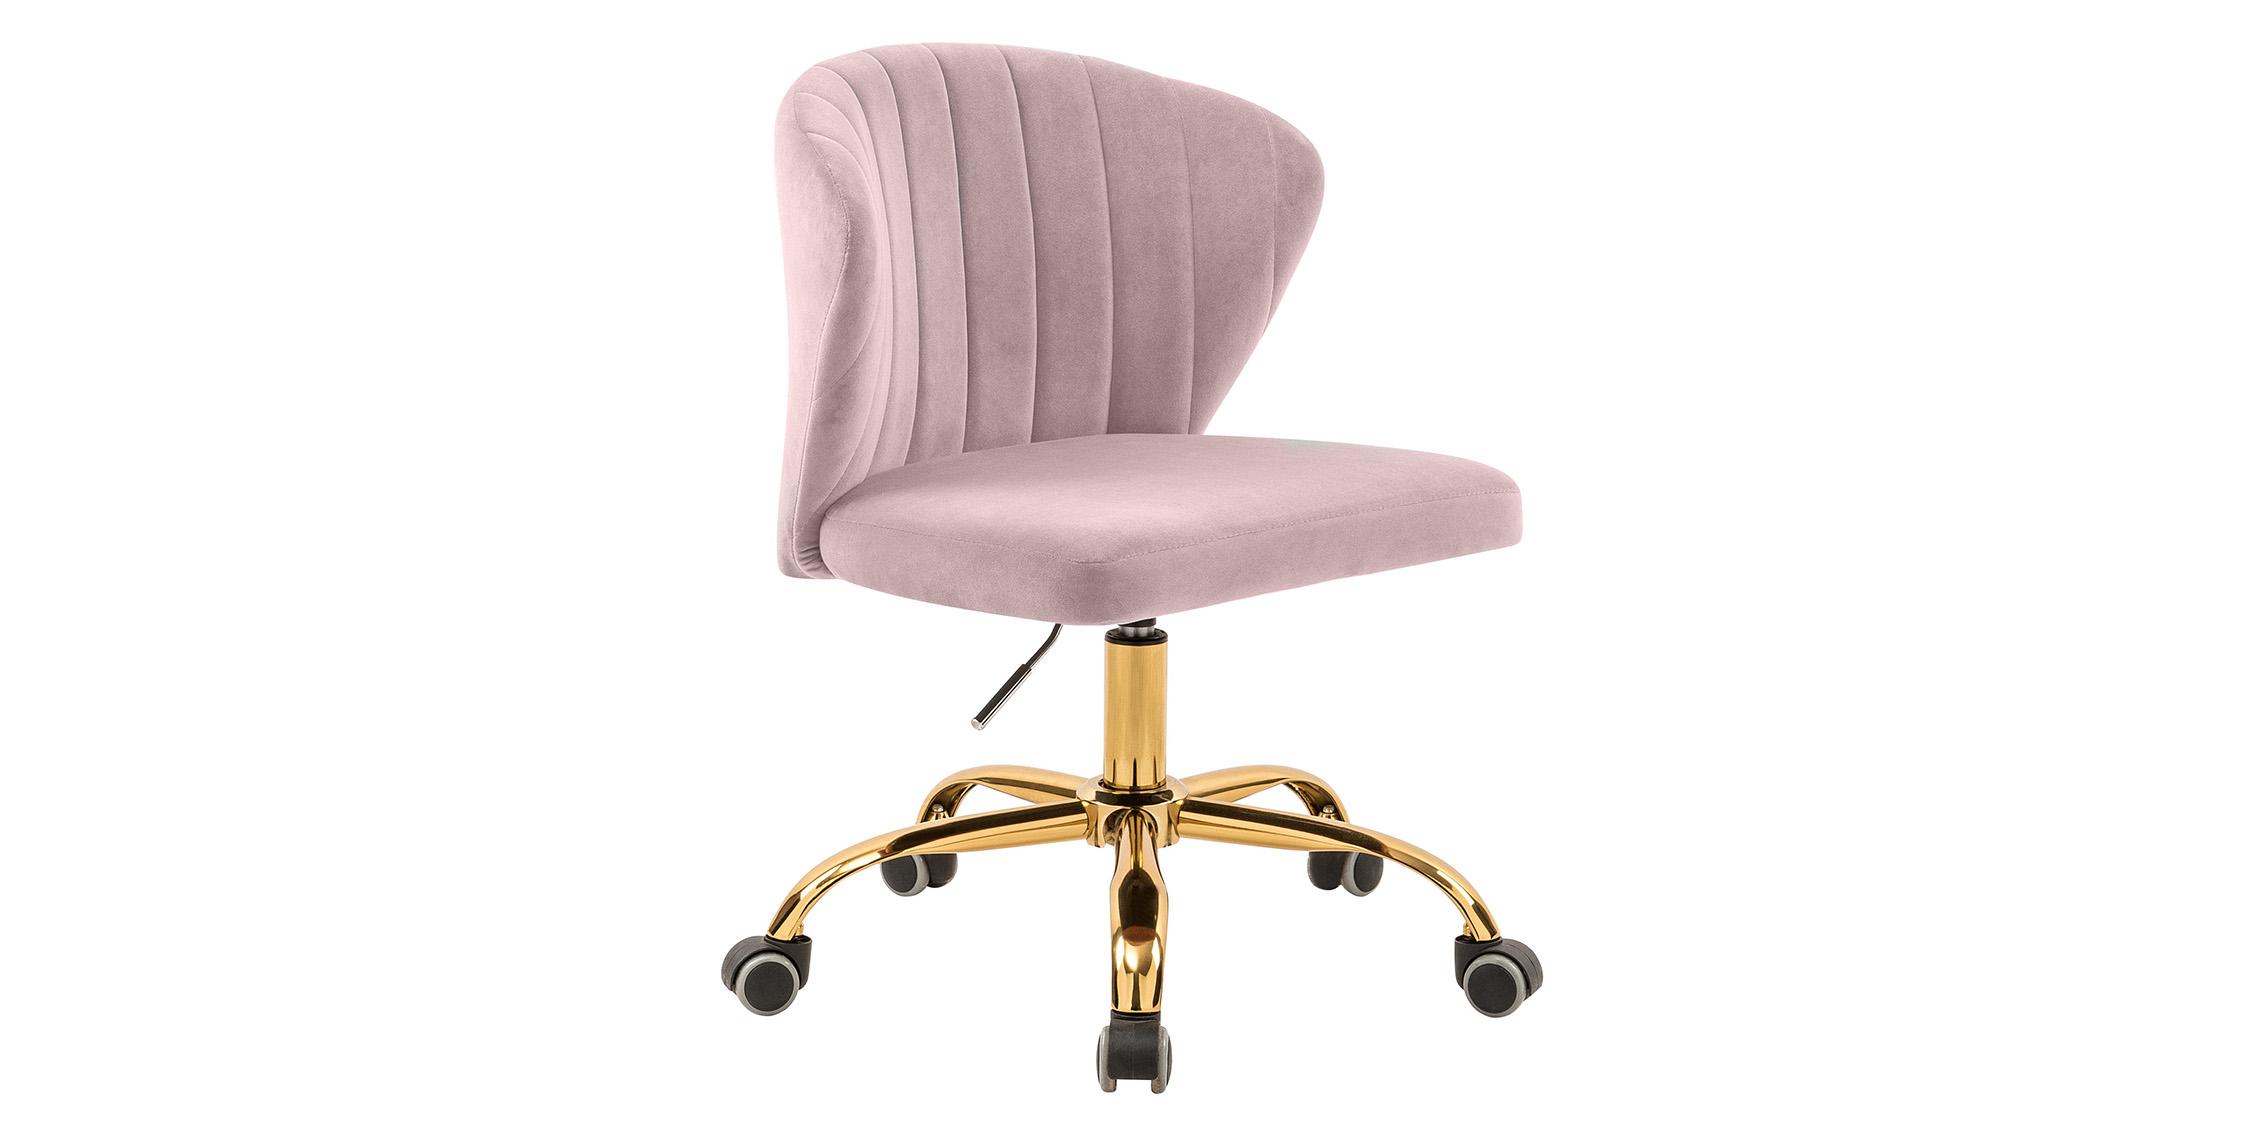 Contemporary, Modern Office Chair FINLEY 165Pink 165Pink in Pink, Gold Fabric